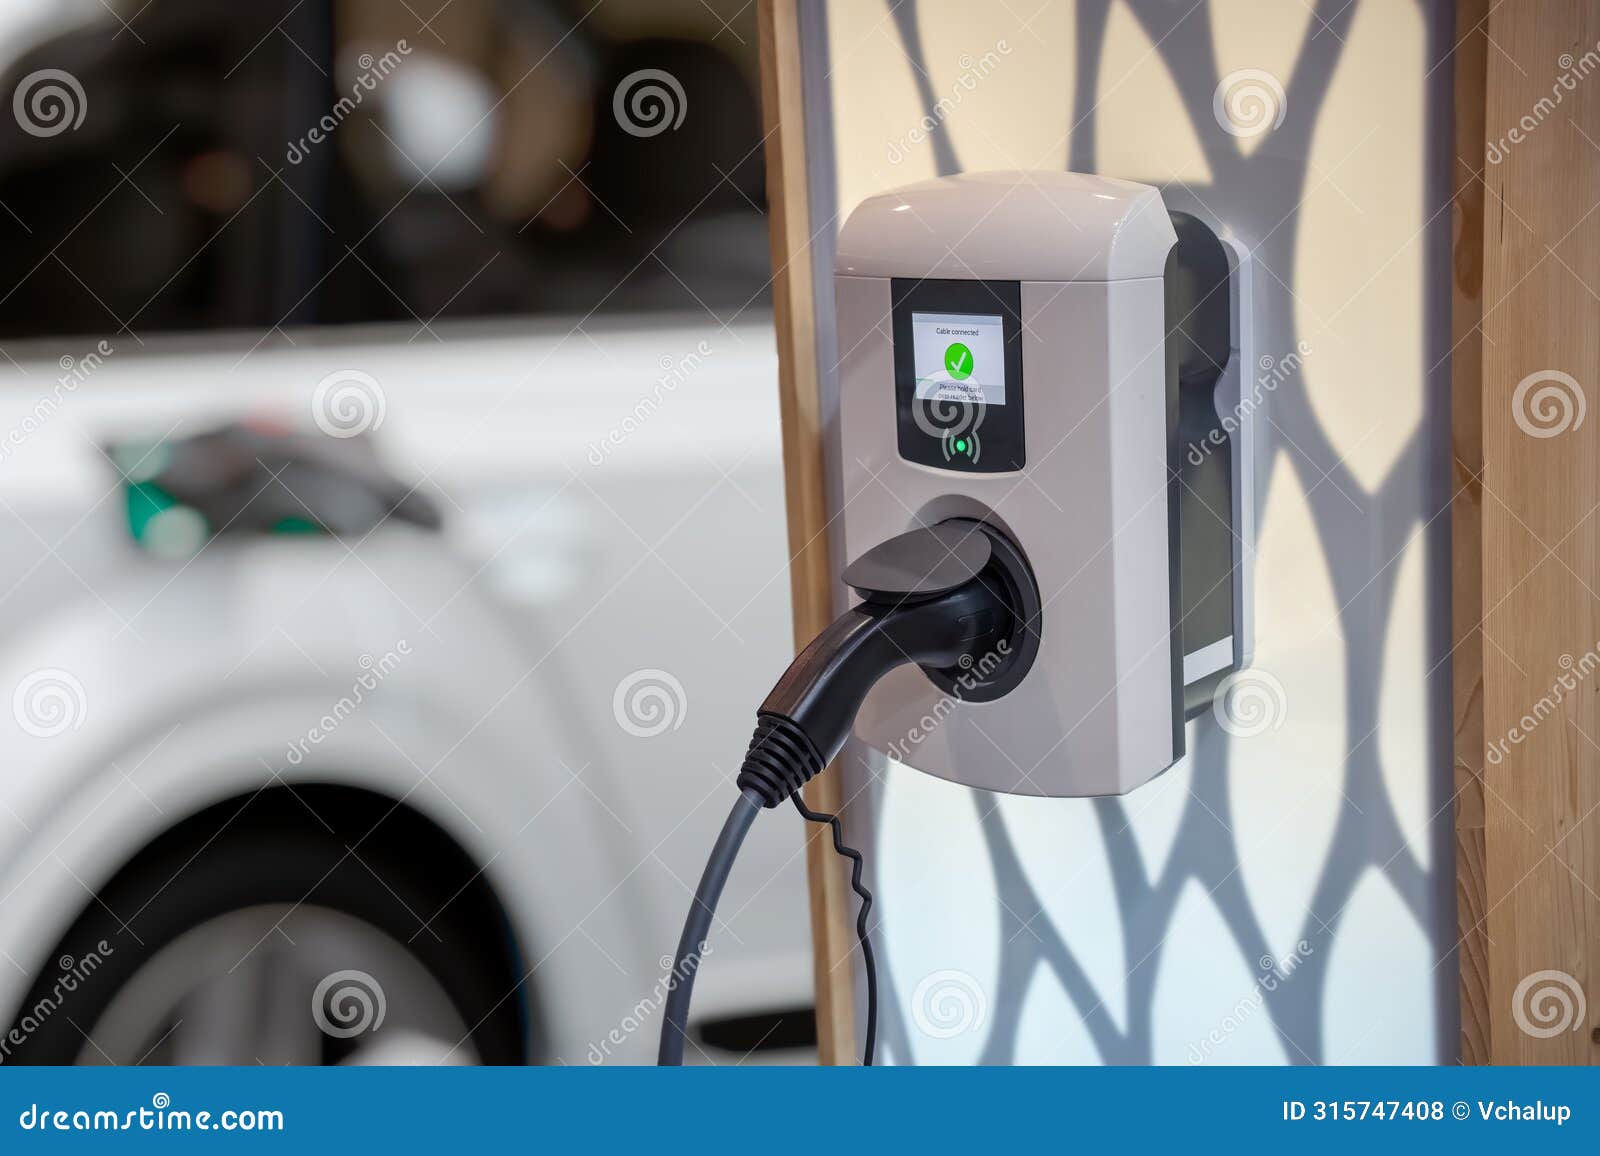 electric car (ev) is charging in socket with cable